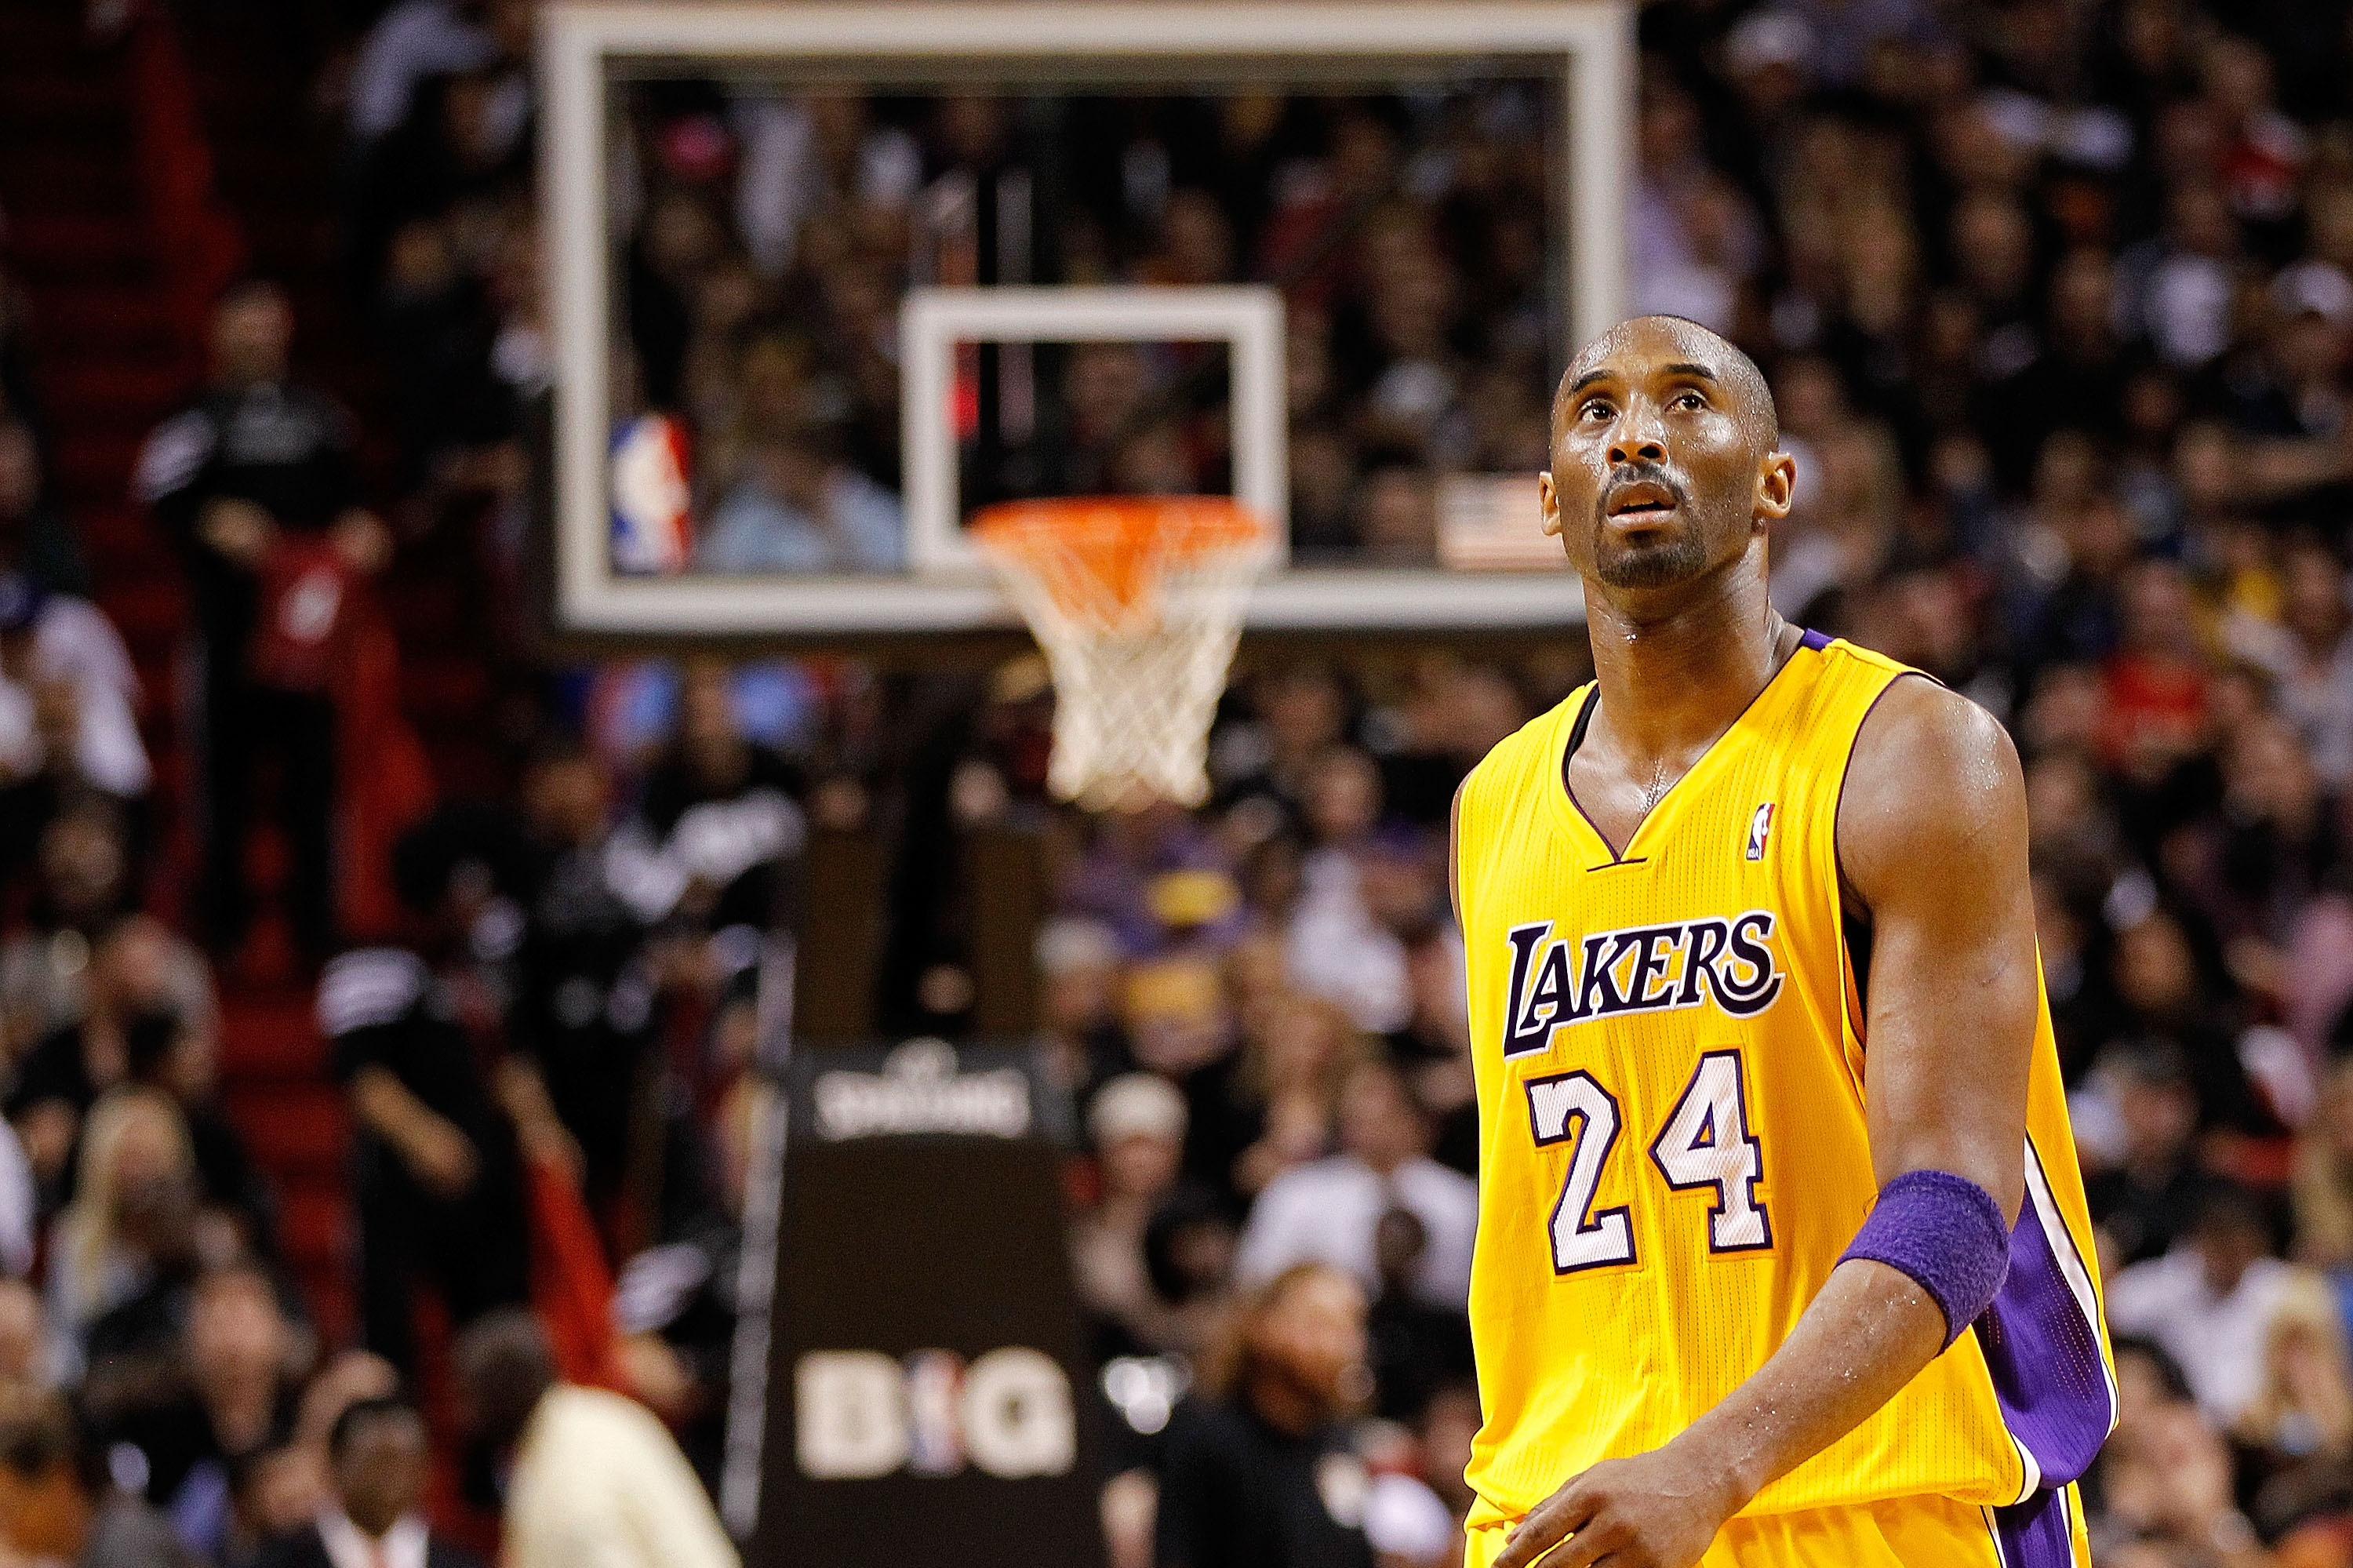 Lakers going all in on Kobe Bryant still being a dominant force in